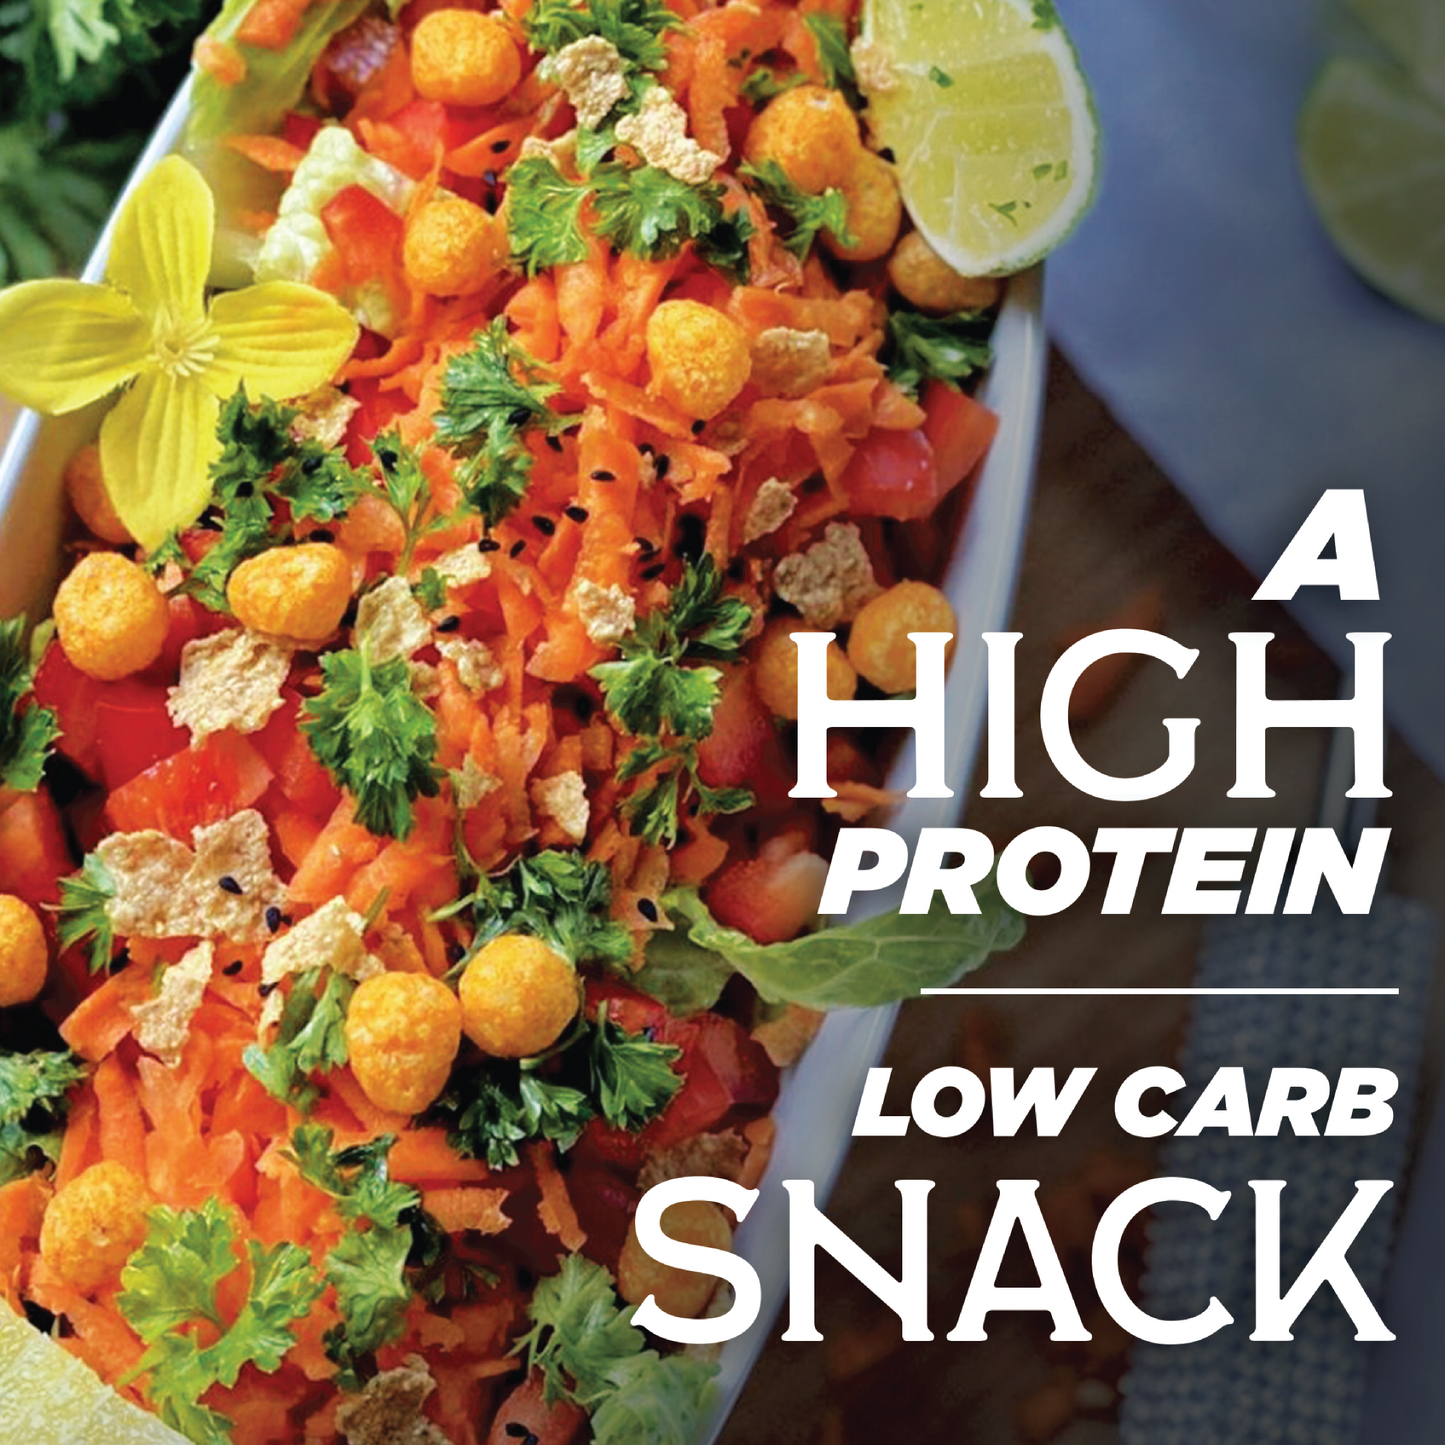 High Protein Low Carb Snack - Salad with Protein Puffs as a topper